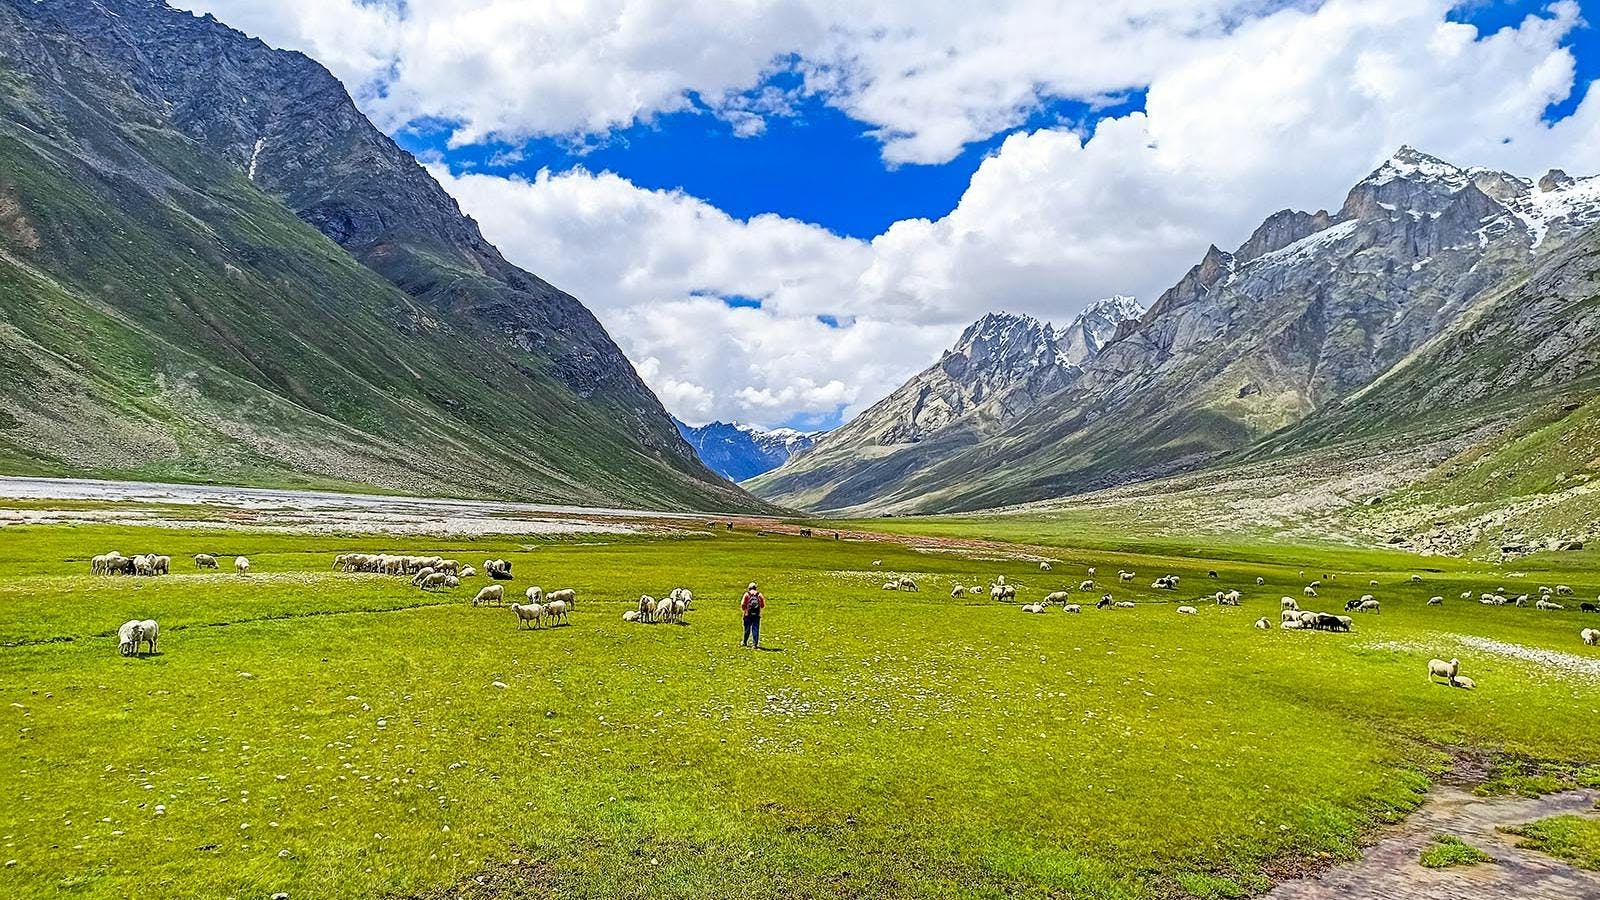 An encounter between a flock of sheep and a trekker in the meadows of Miyar Valley